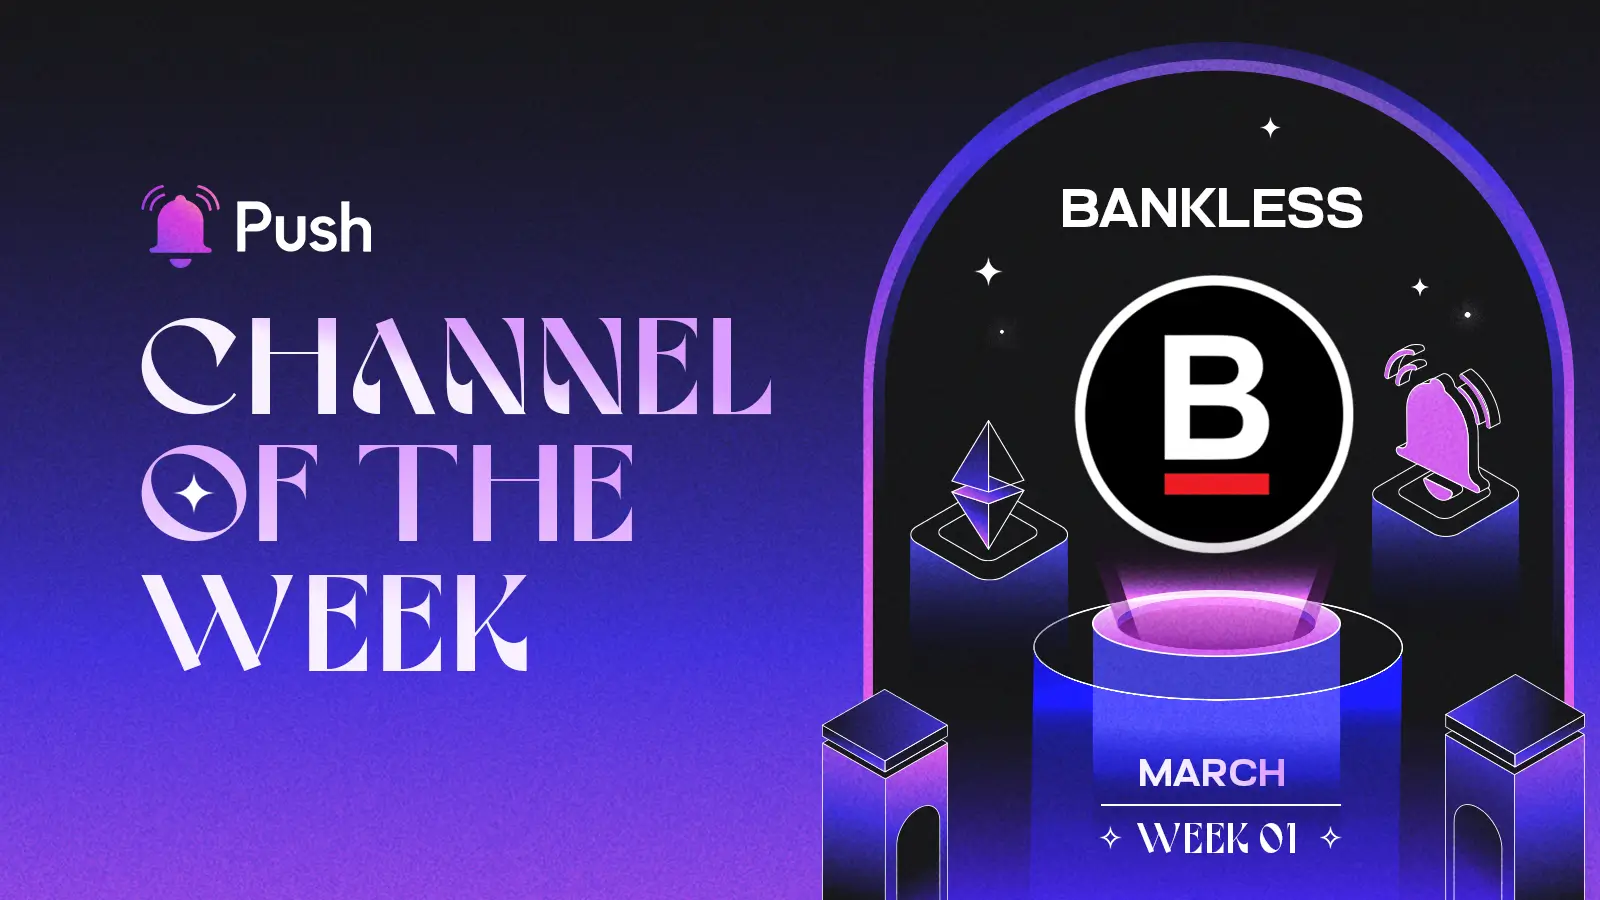 Banner celebrating Bankless as March - week 1 channel of week